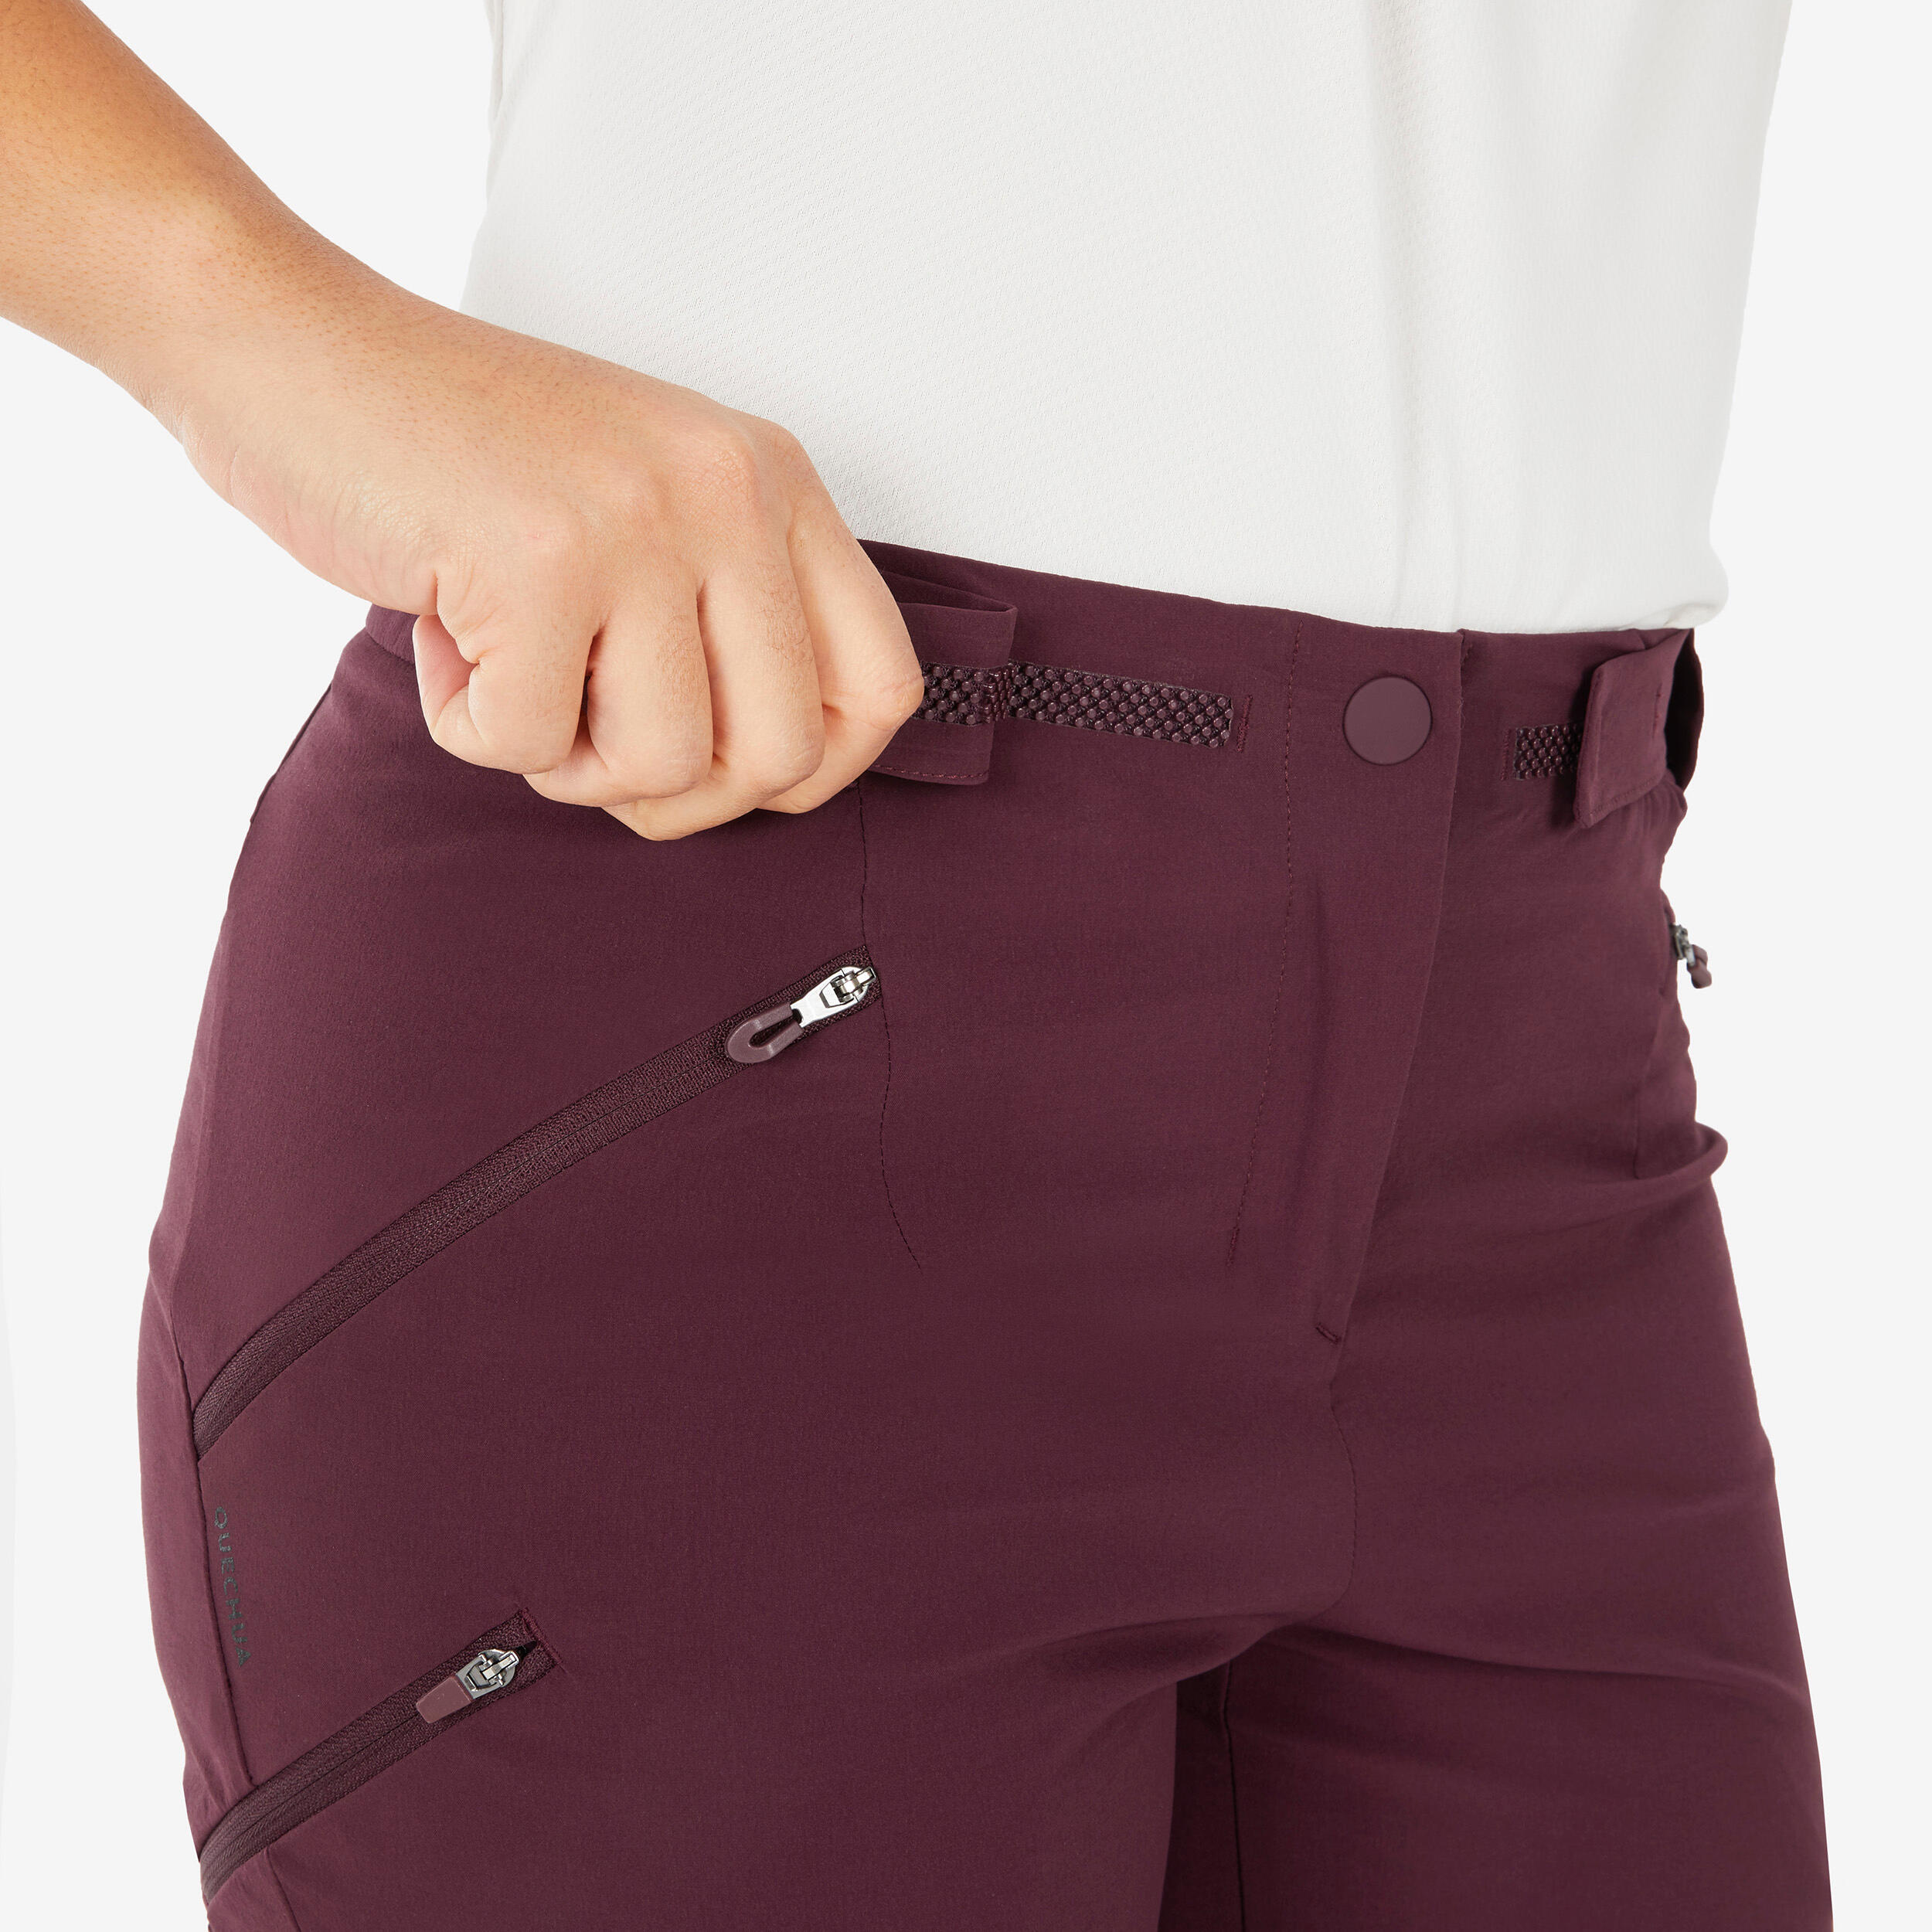 Women's hiking trousers - MH500 4/5